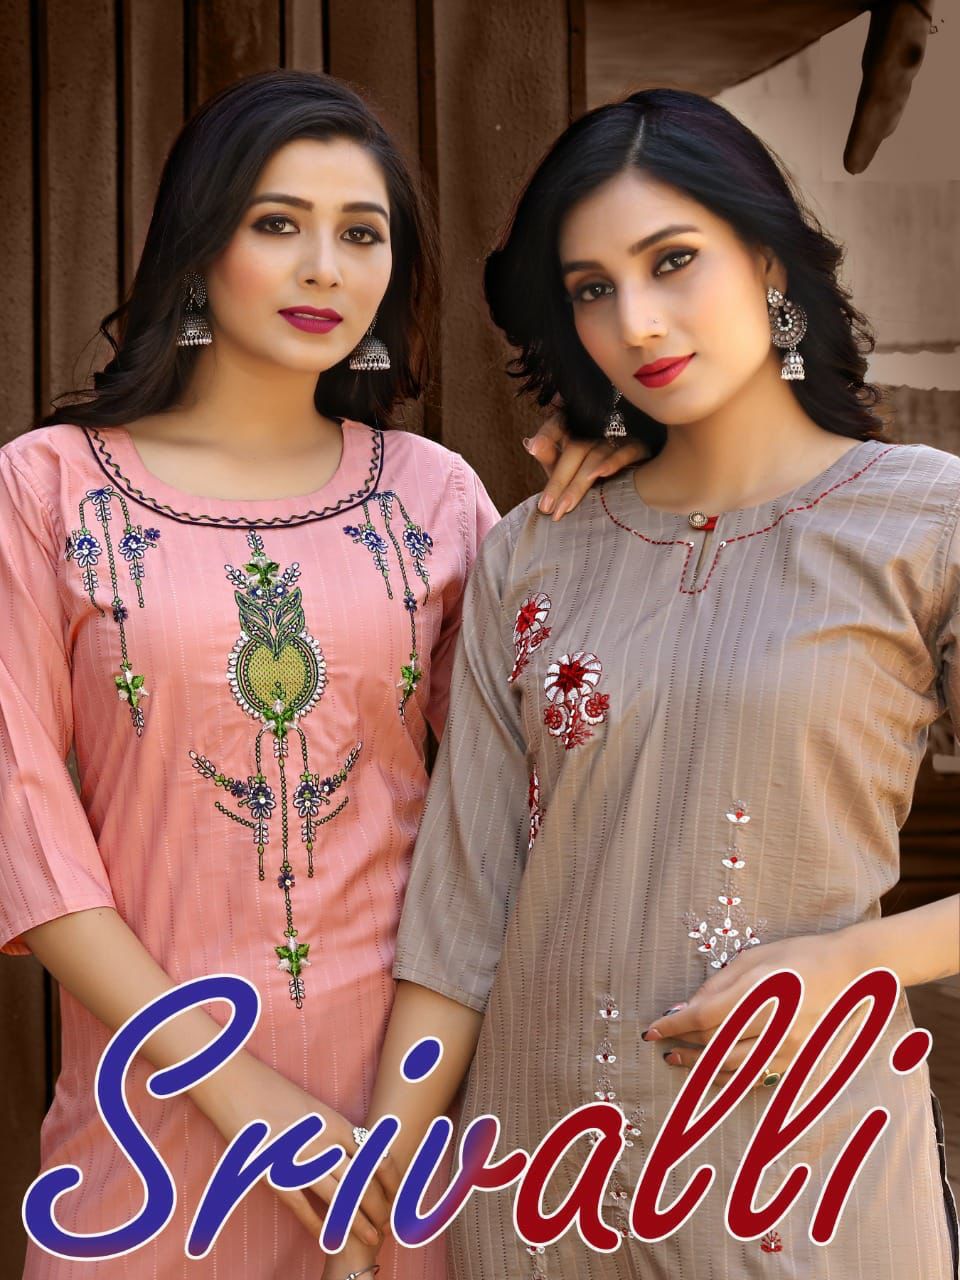 Kurti boutique is a new fashion brand store at low prices.